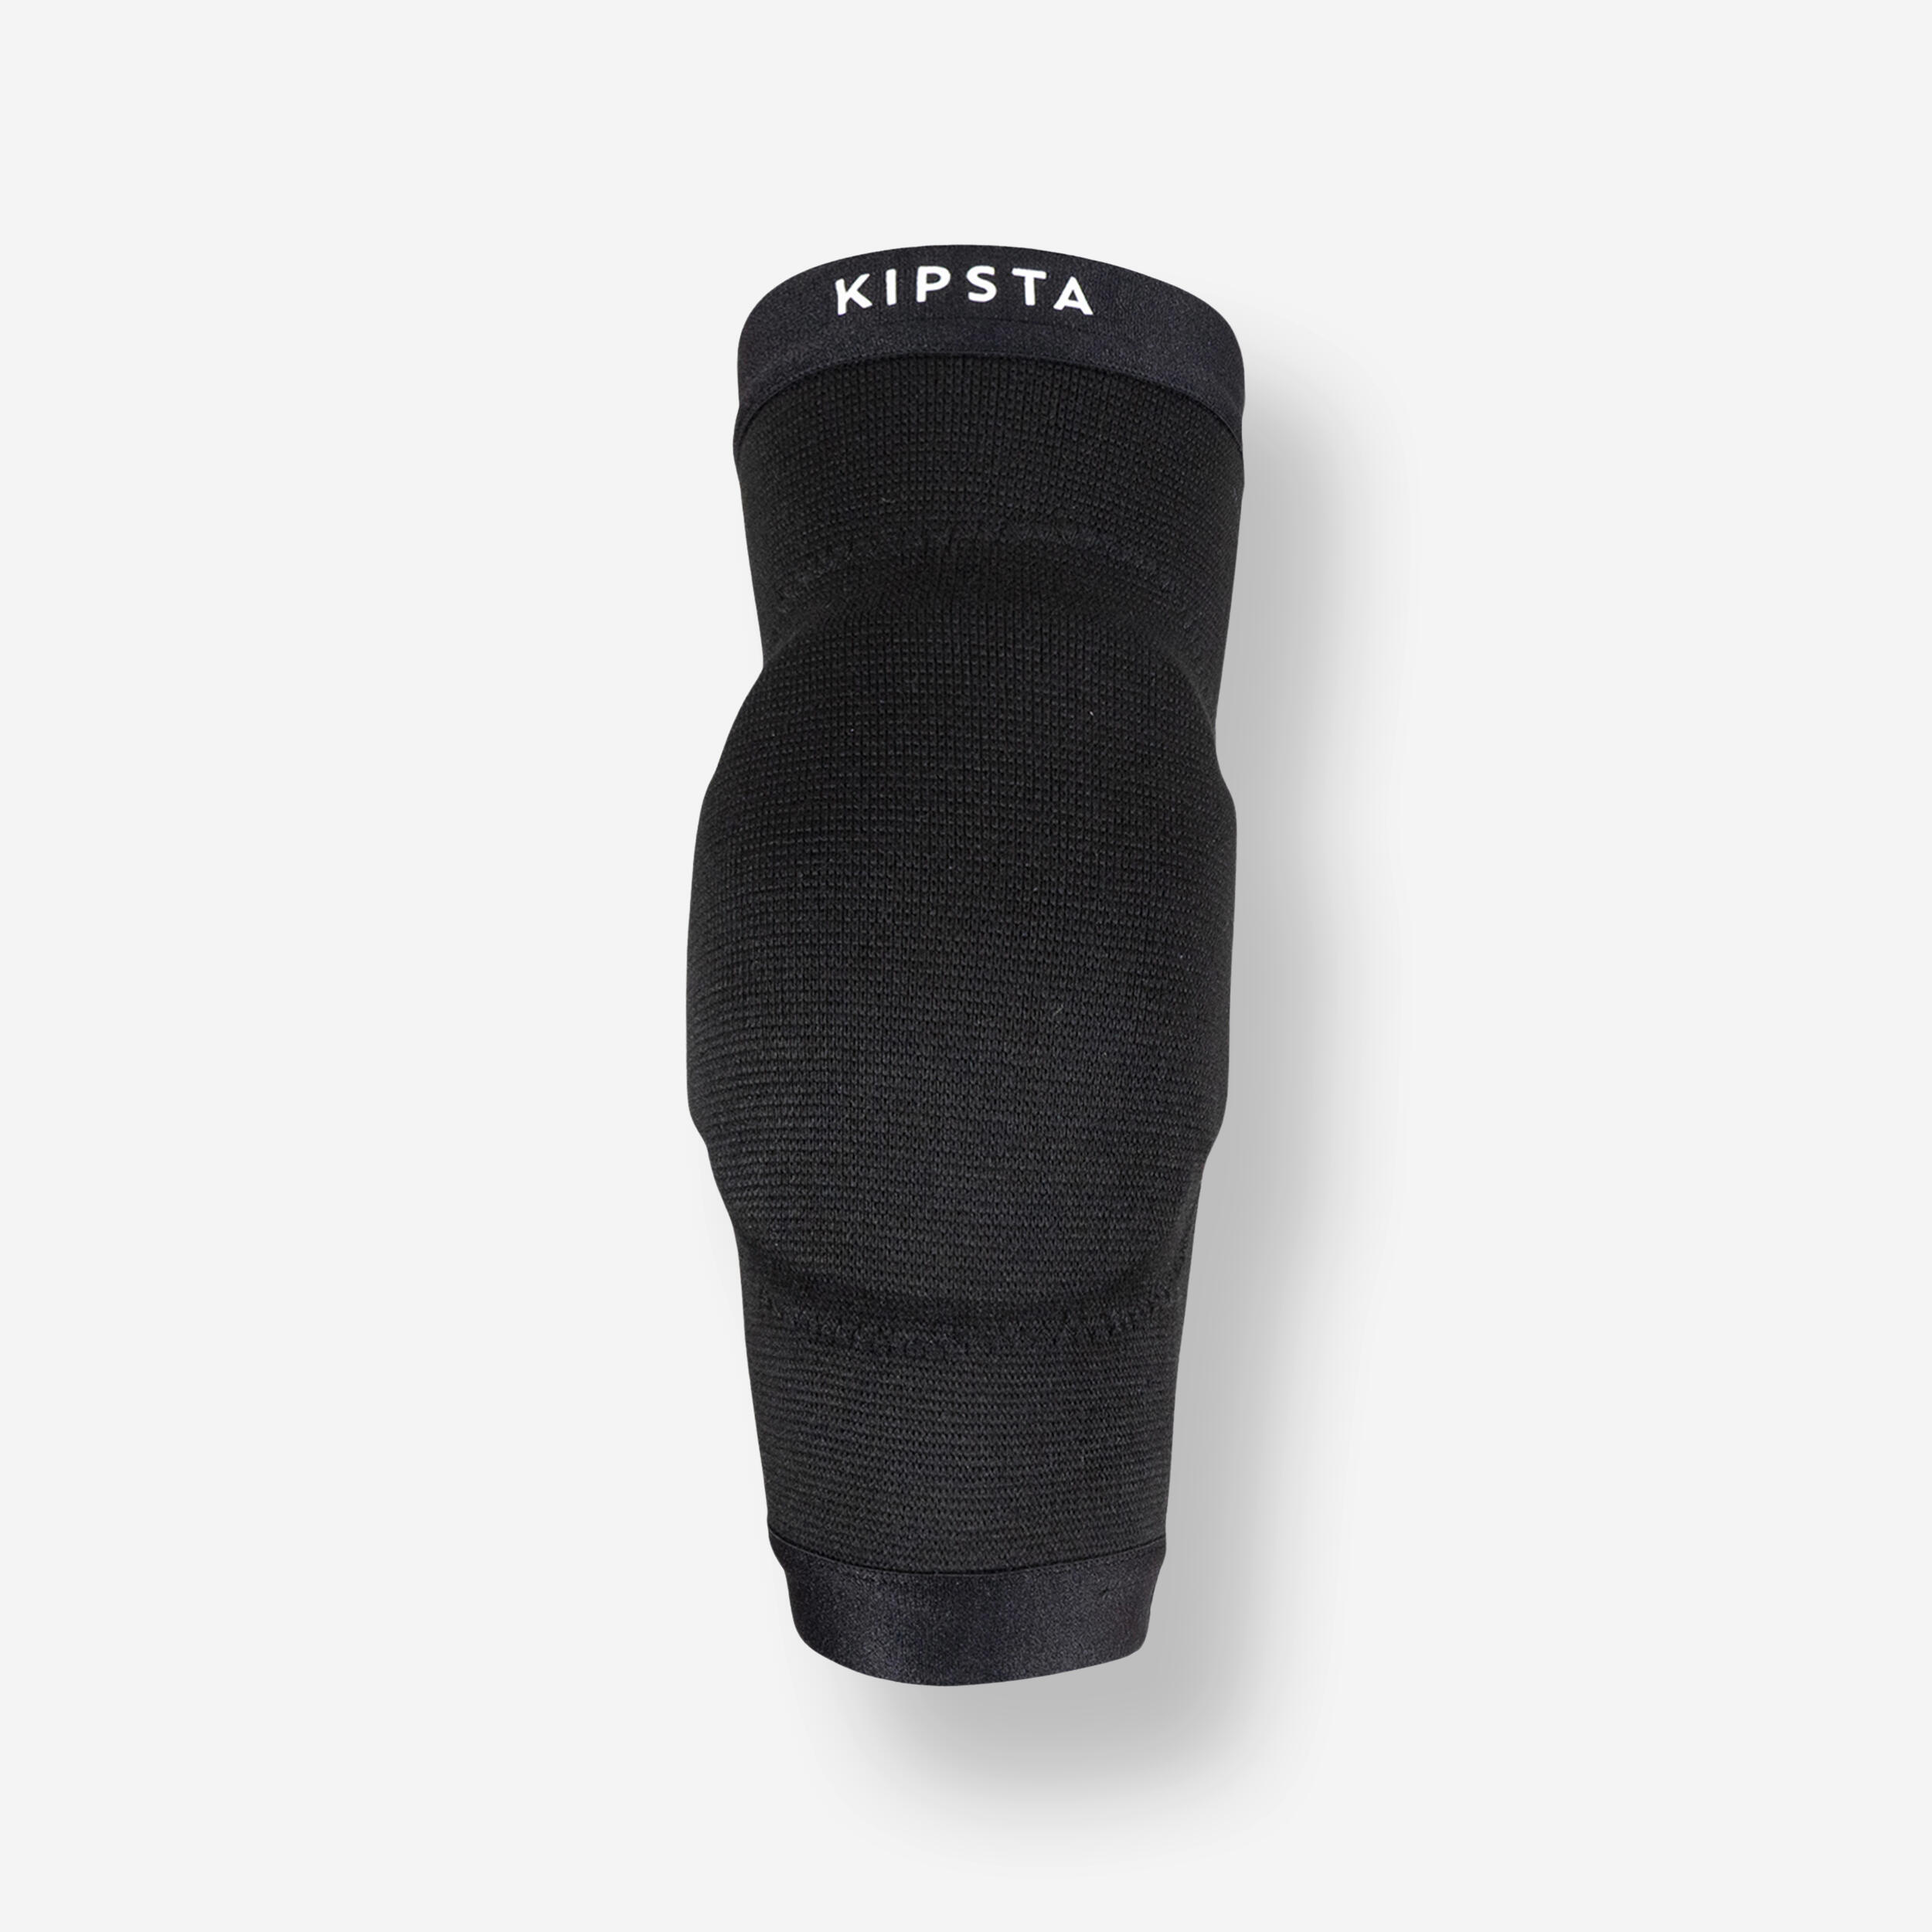 Image of Volleyball Knee Pads - VKP 500 Black